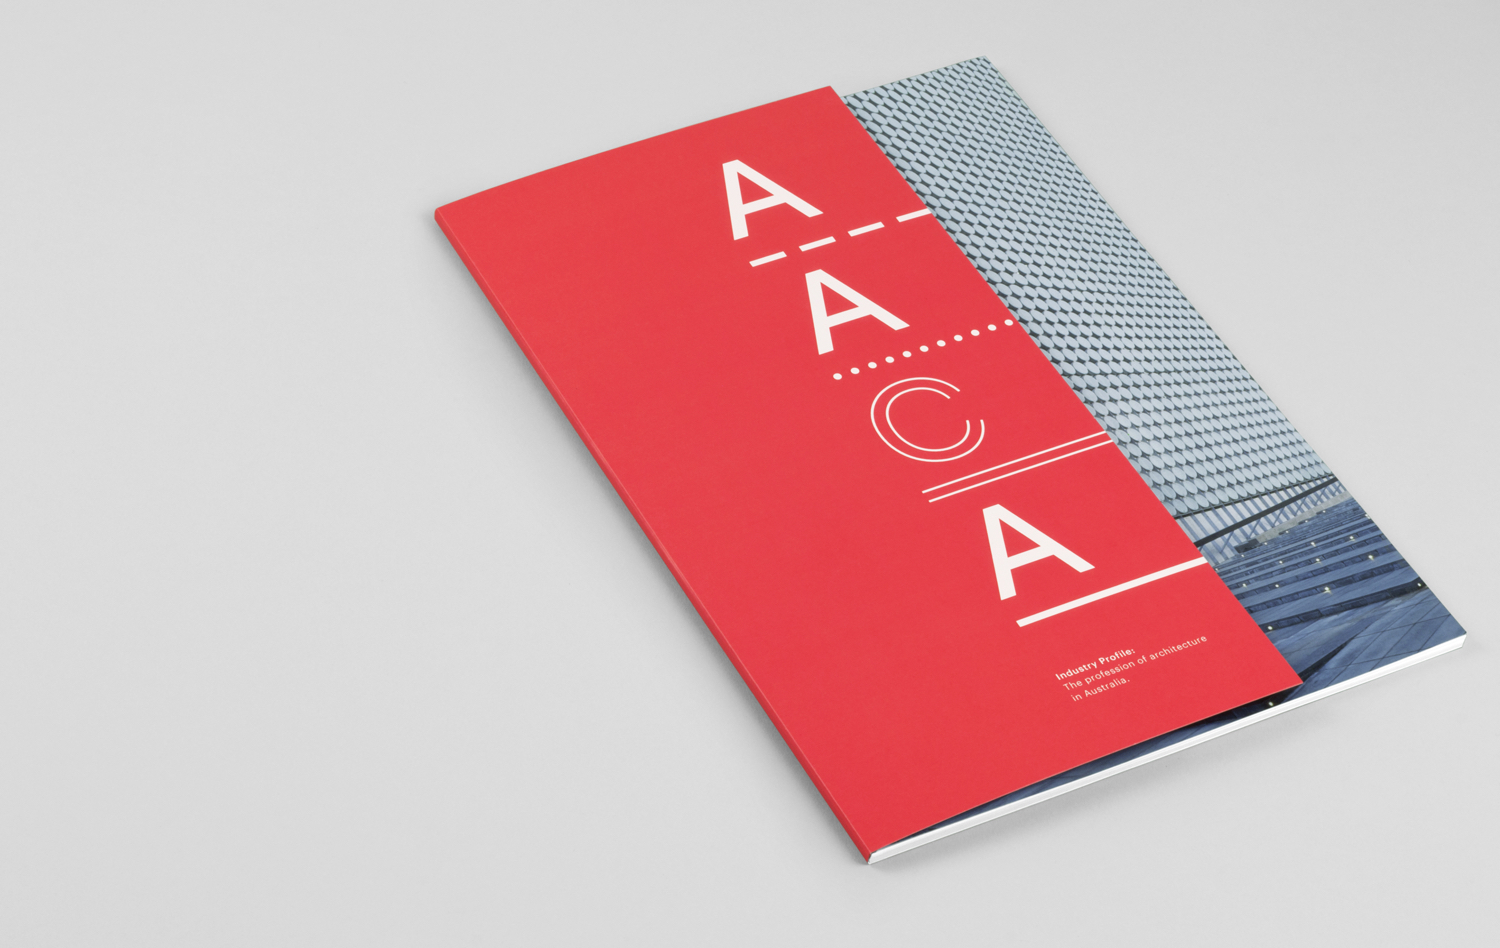 Graphic identity and document by Toko for Architects Accreditation Council Of Australia